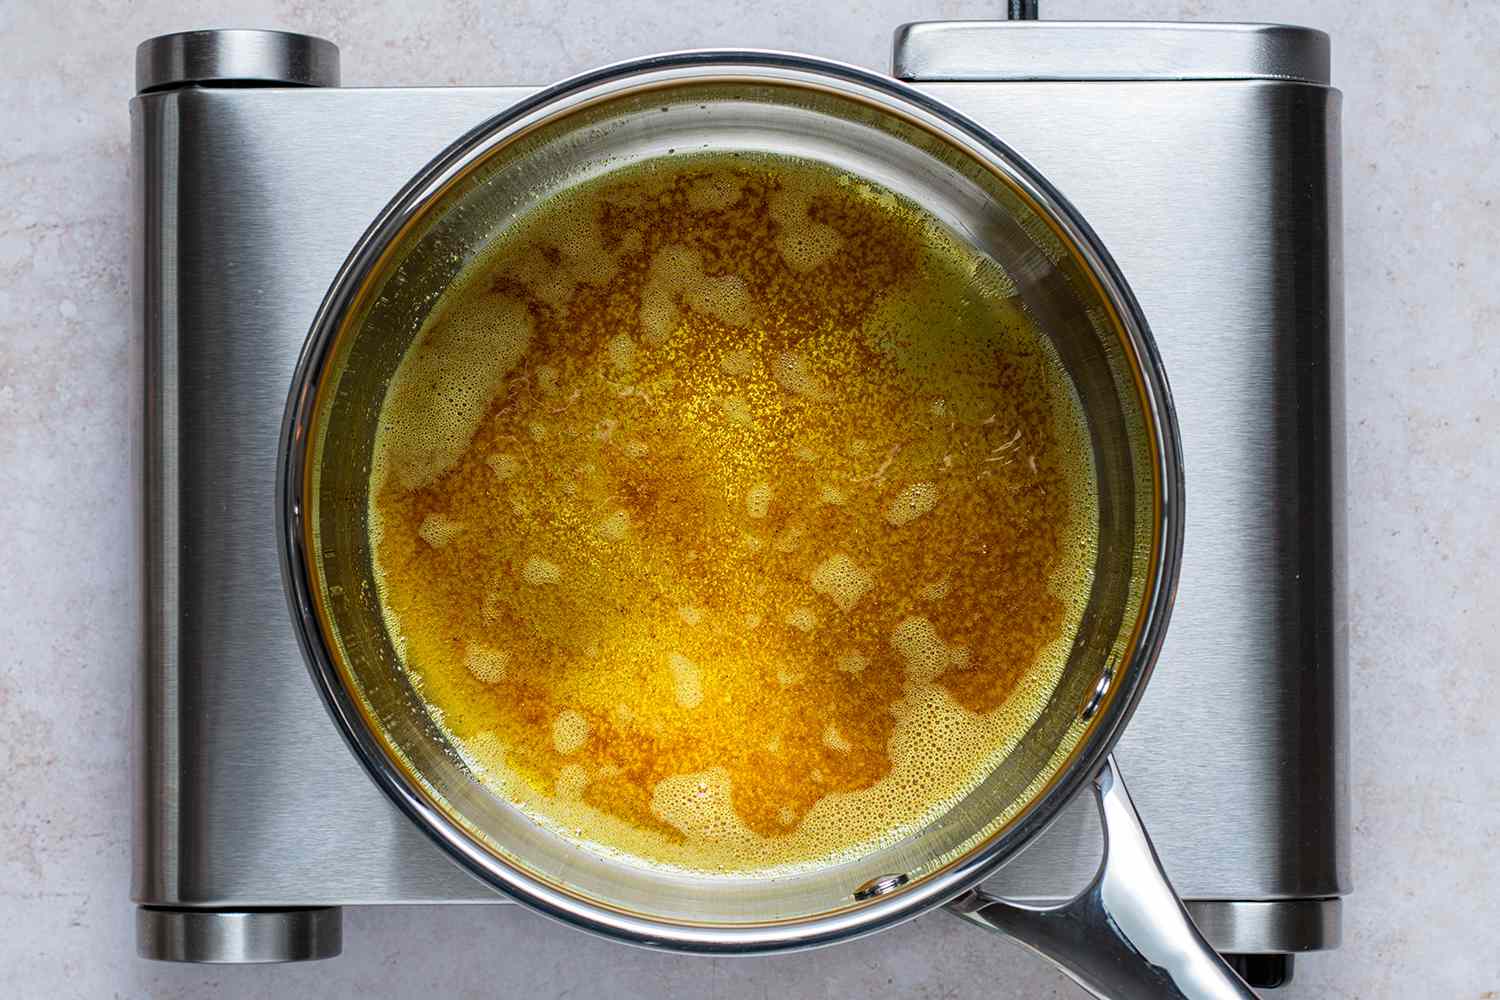 Oil, turmeric, curry powder, and rice in a saucepan on a burner 